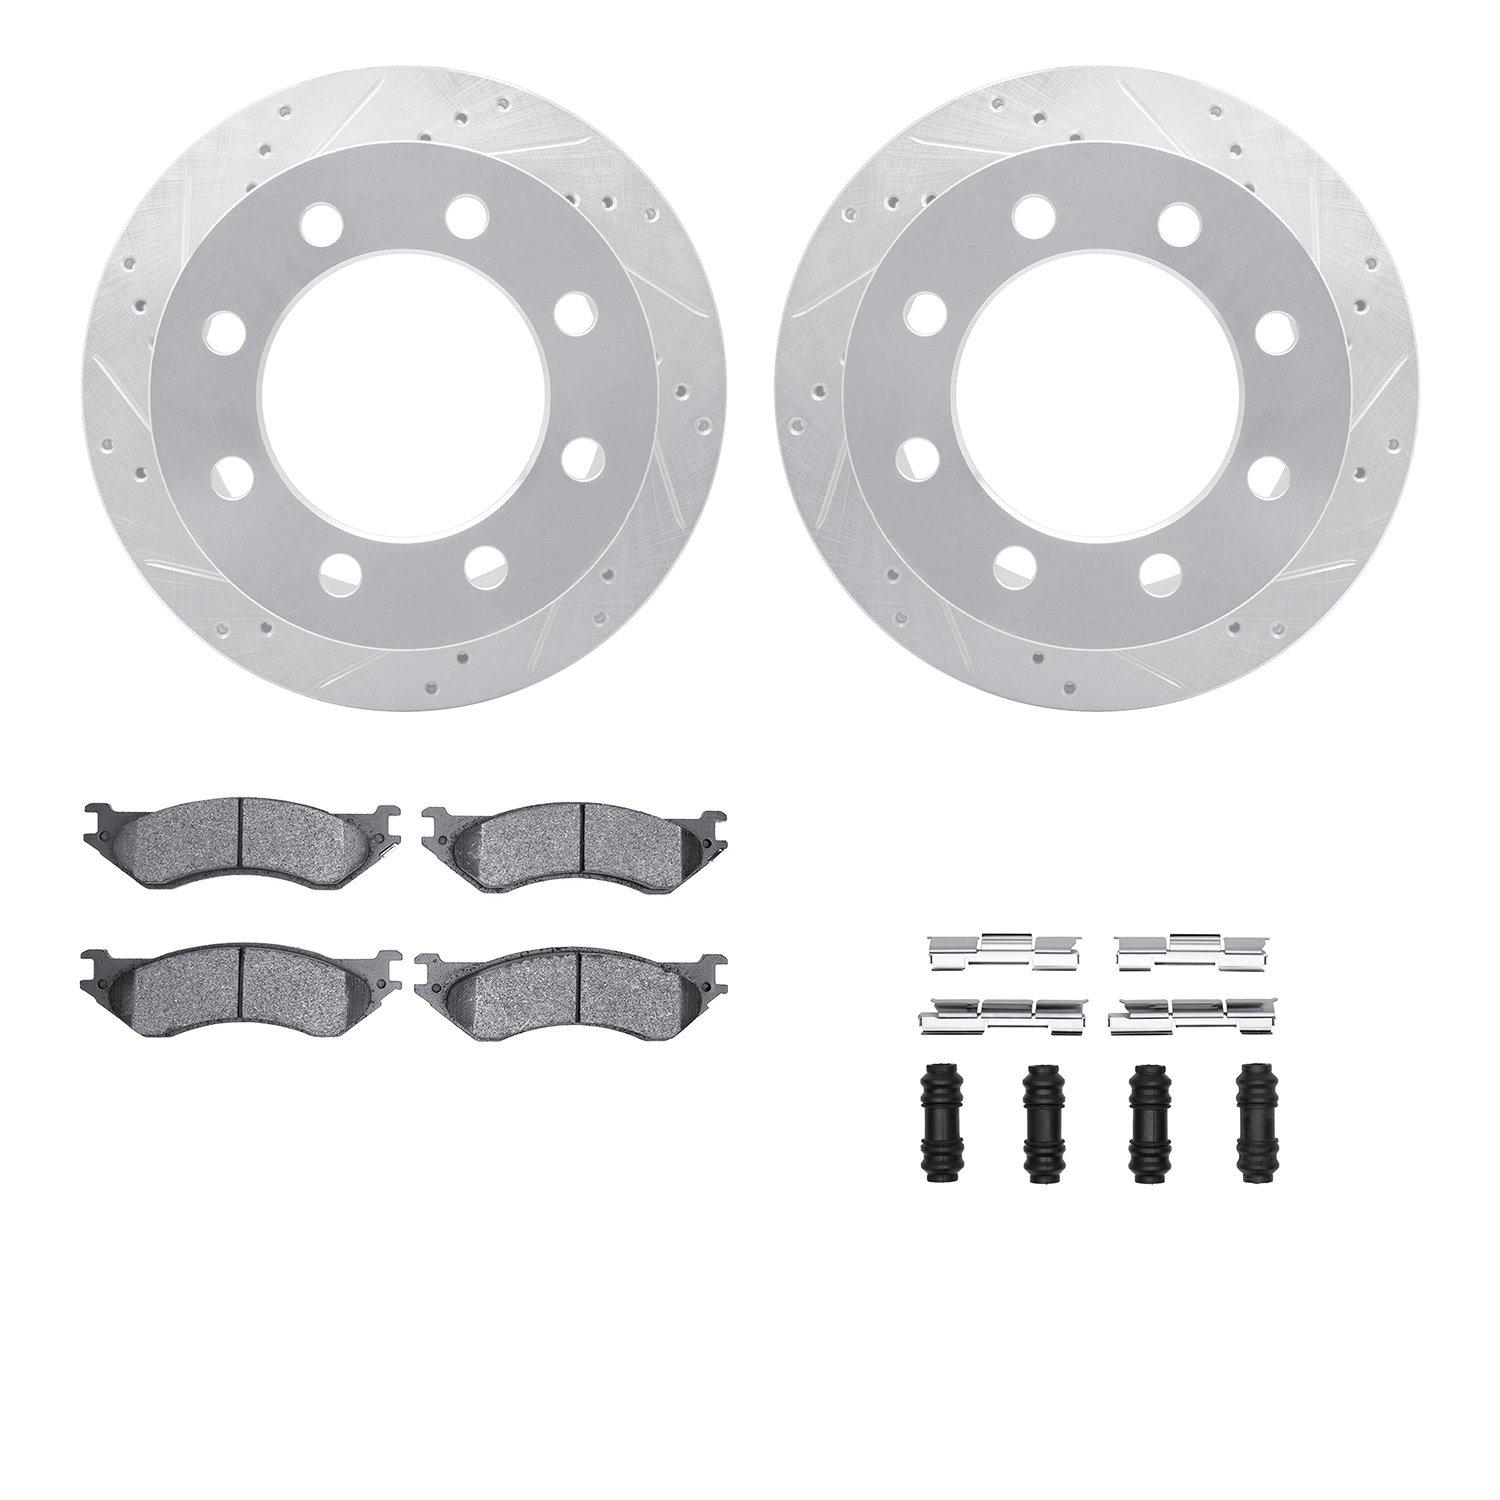 7412-40009 Drilled/Slotted Brake Rotors with Ultimate-Duty Brake Pads Kit & Hardware [Silver], 2000-2002 Mopar, Position: Rear